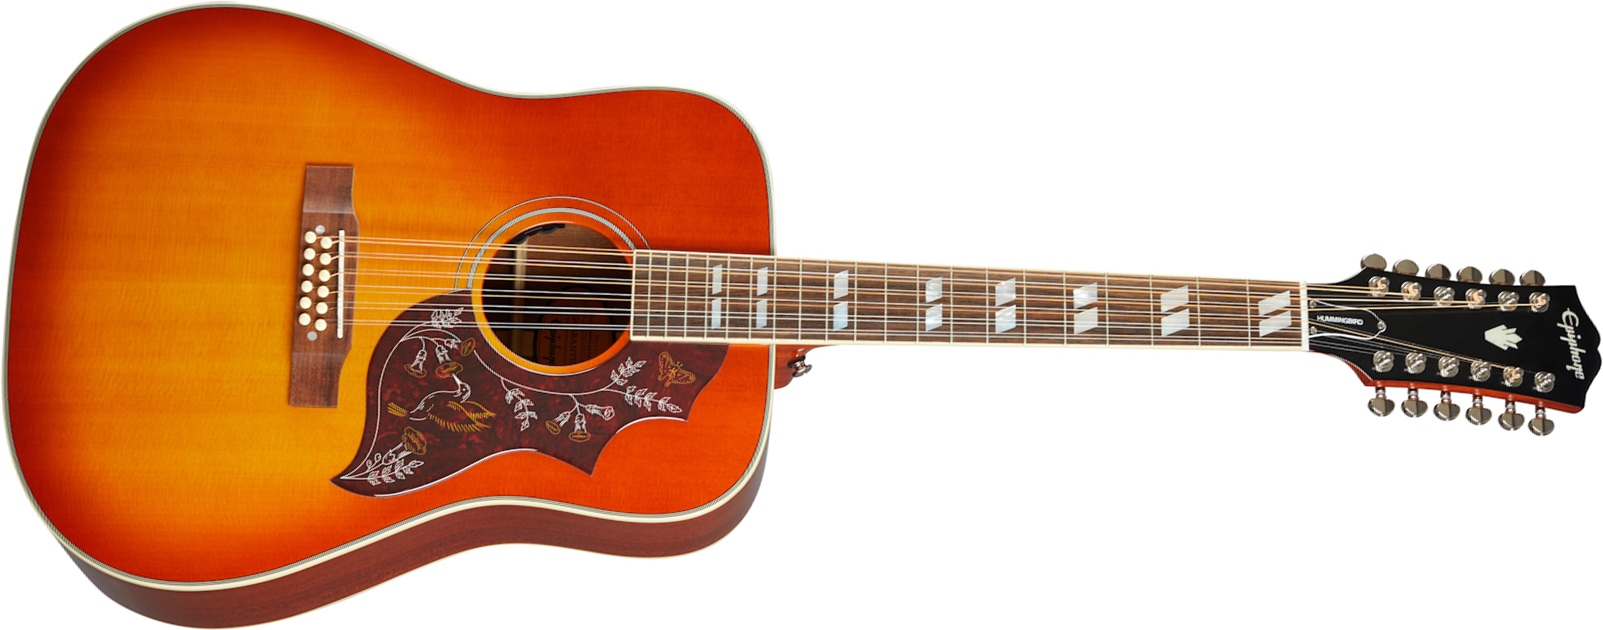 Epiphone Hummingbird 12-string Inspired By Gibson Dreadnought 12c Epicea Acajou Lau - Aged Cherry Sunburst - Electro acoustic guitar - Main picture